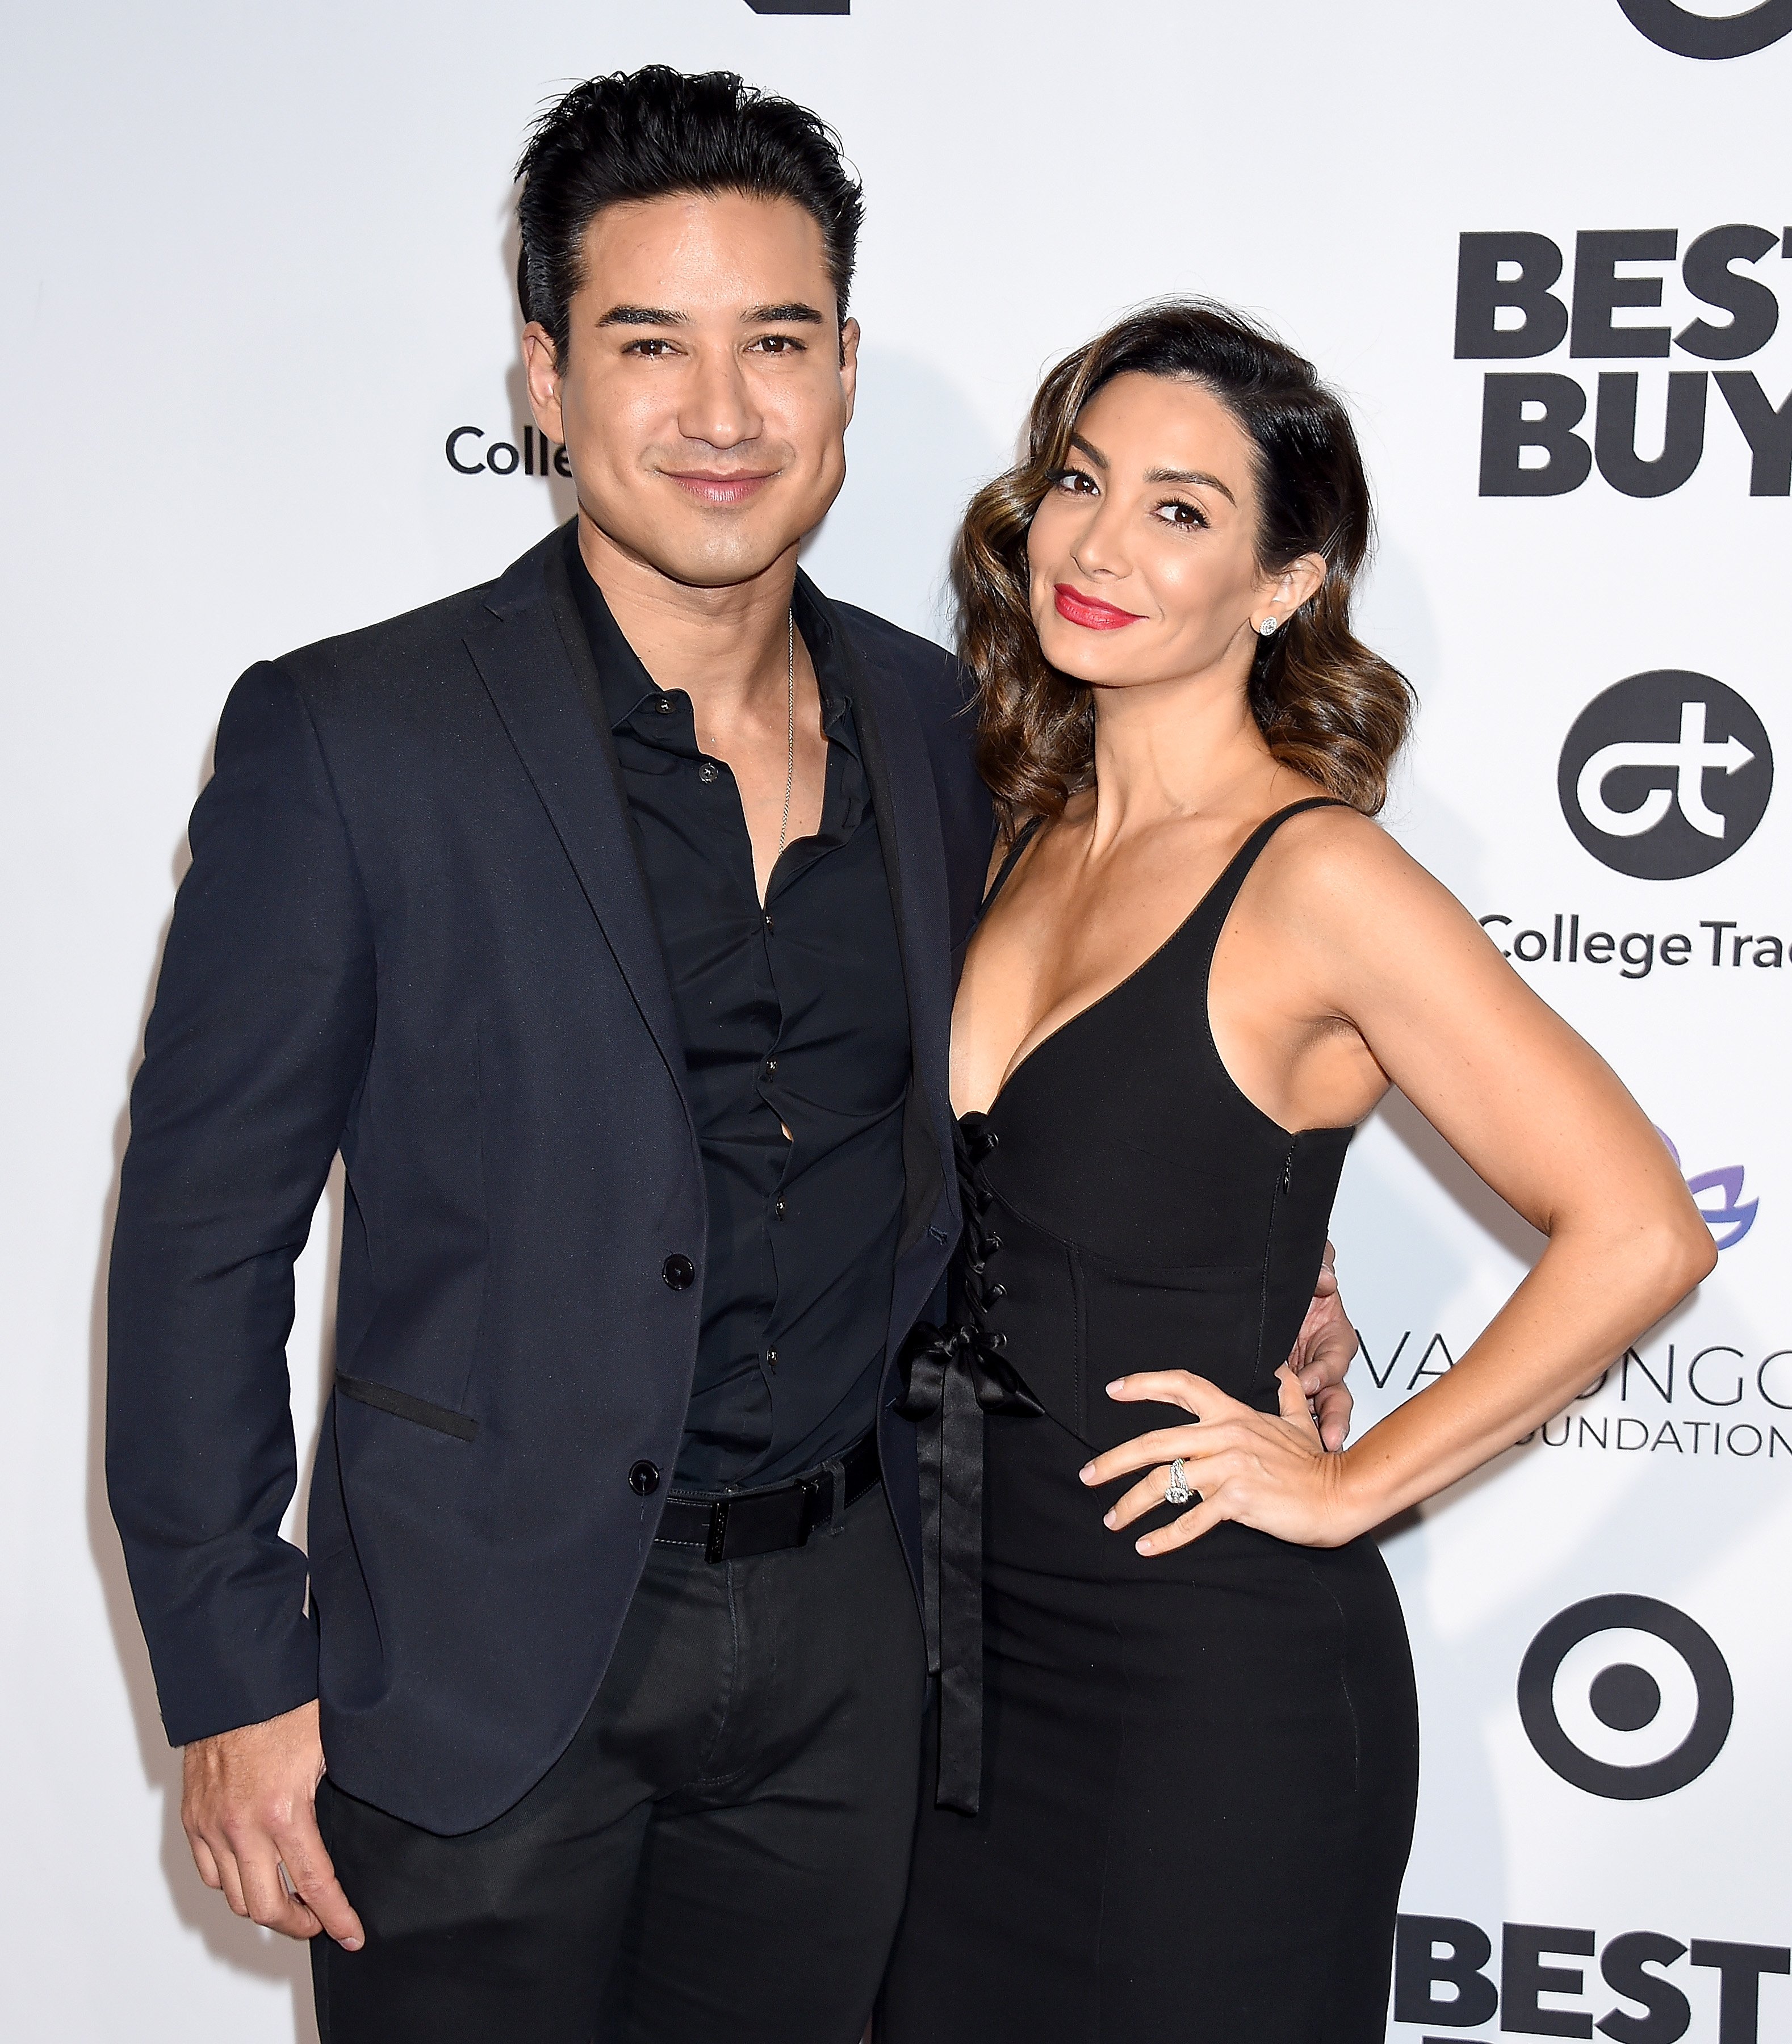 Mario Lopez and Courtney Laine Mazza attend the Eva Longoria Foundation Dinner Gala in Los Angeles, California on November 8, 2018 | Photo: Getty Images